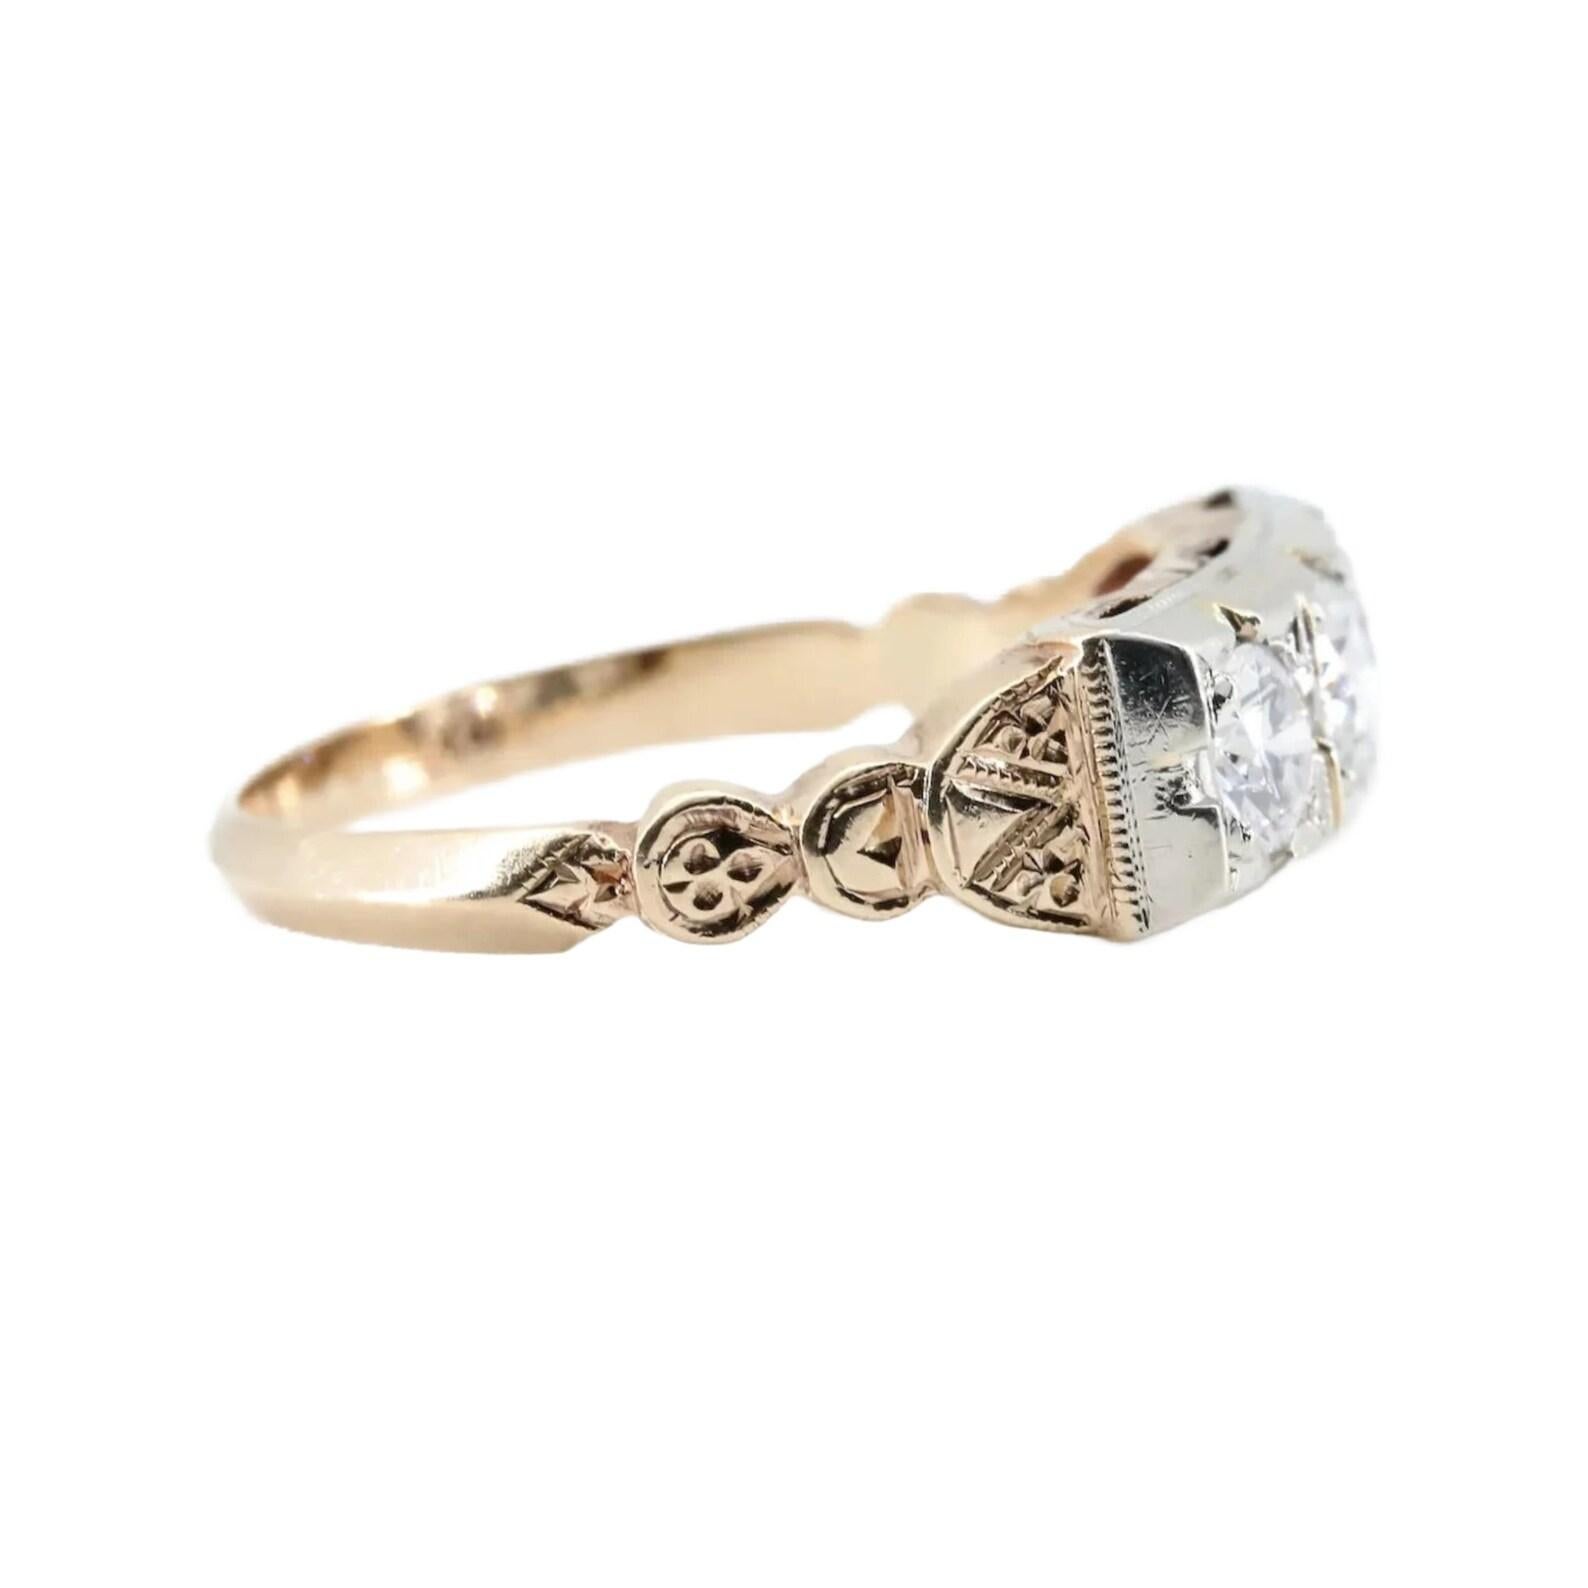 A three stone Art Deco period European cut diamond ring featuring hand engraved detailing. Centering this ring is a 0.30ct old European cut diamond accented by two matched 0.40ctw diamonds. The trio of sparkling diamonds grade as G/H color and VS2